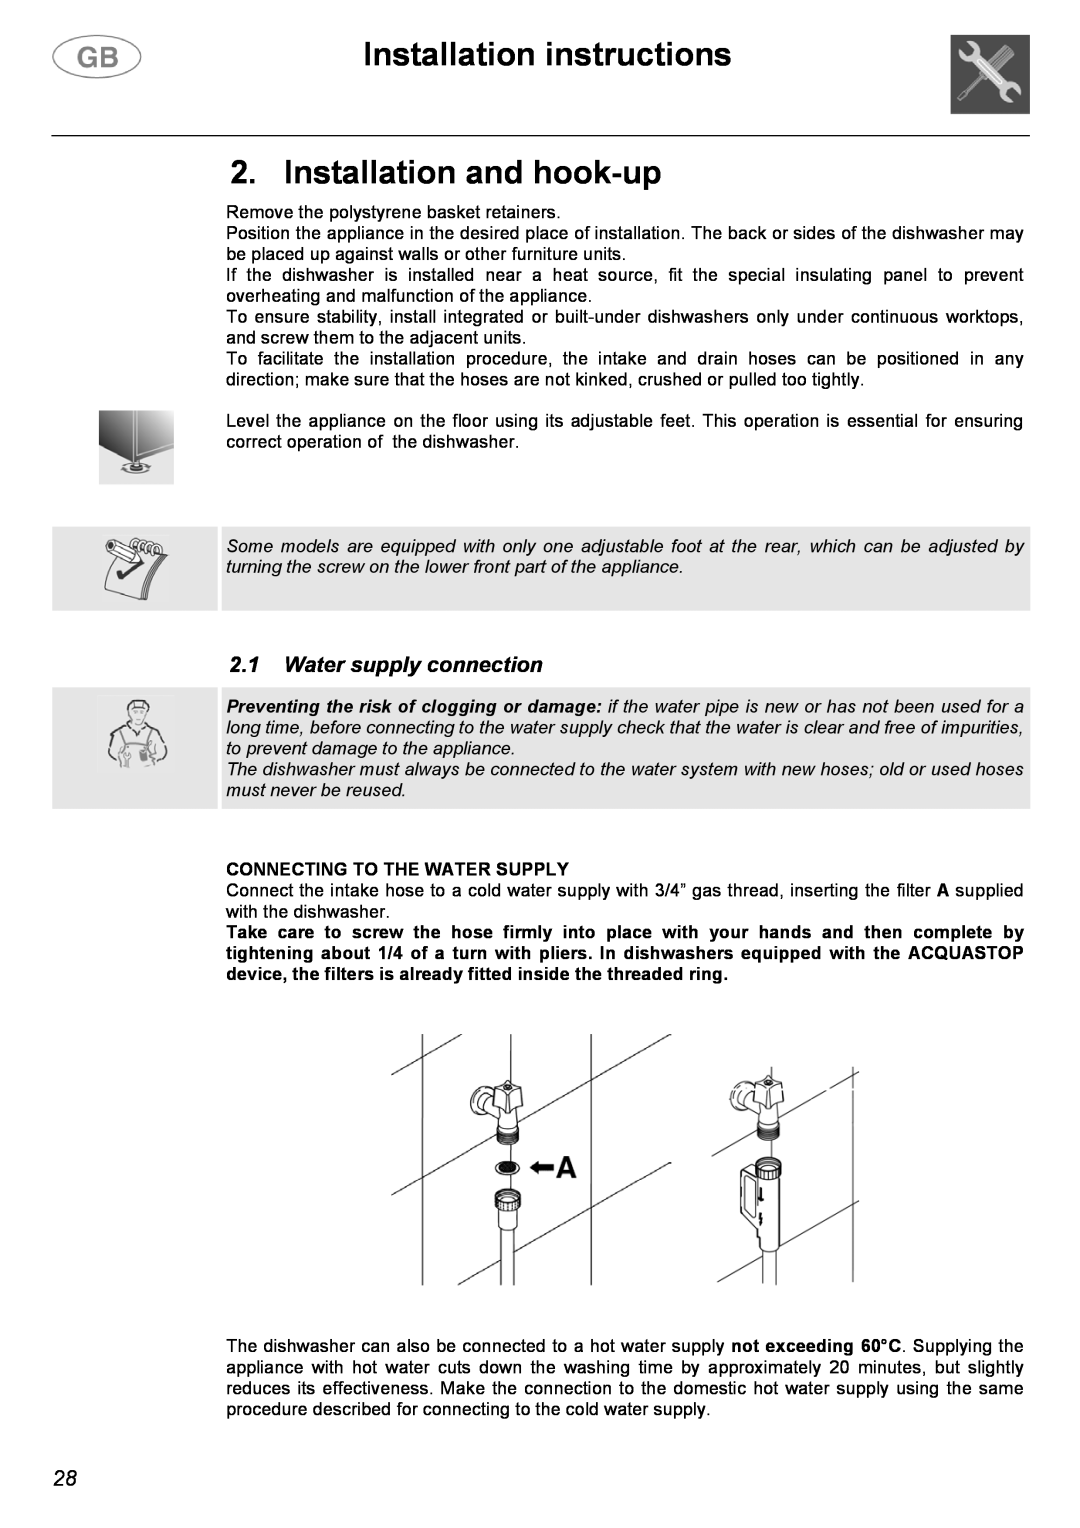 Smeg EL05 Installation instructions, Installation and hook-up, 2.1Water supply connection, Connecting To The Water Supply 